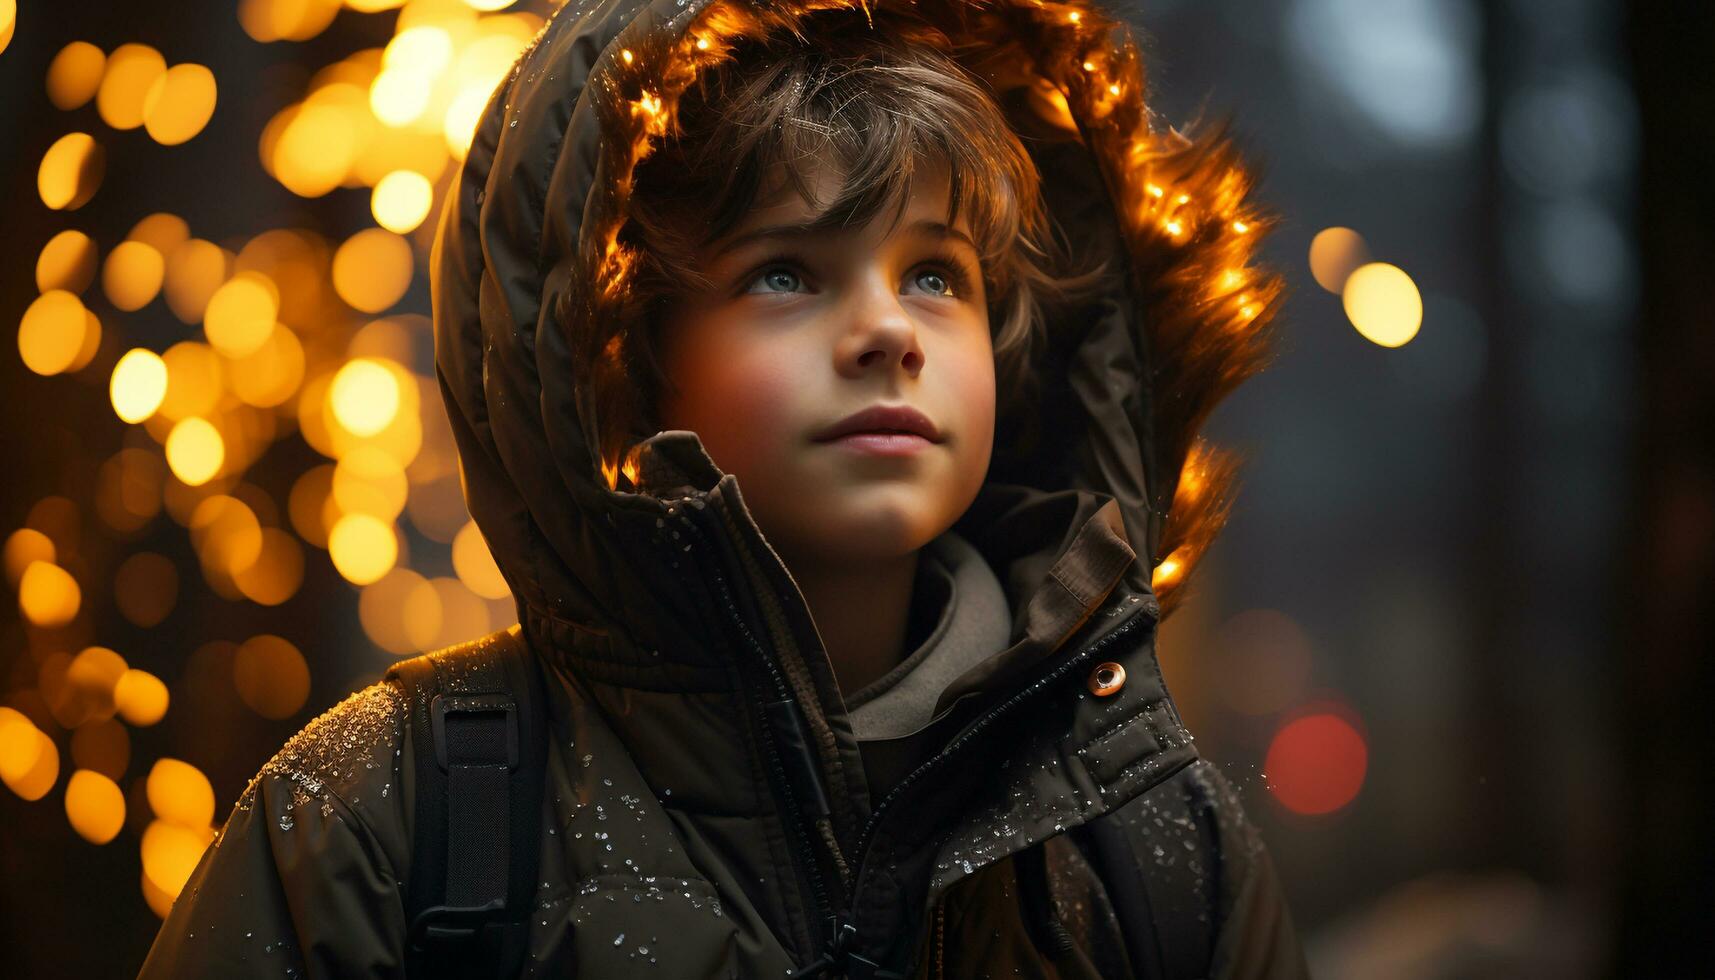 A cute smiling child outdoors in winter, looking at camera generated by AI photo